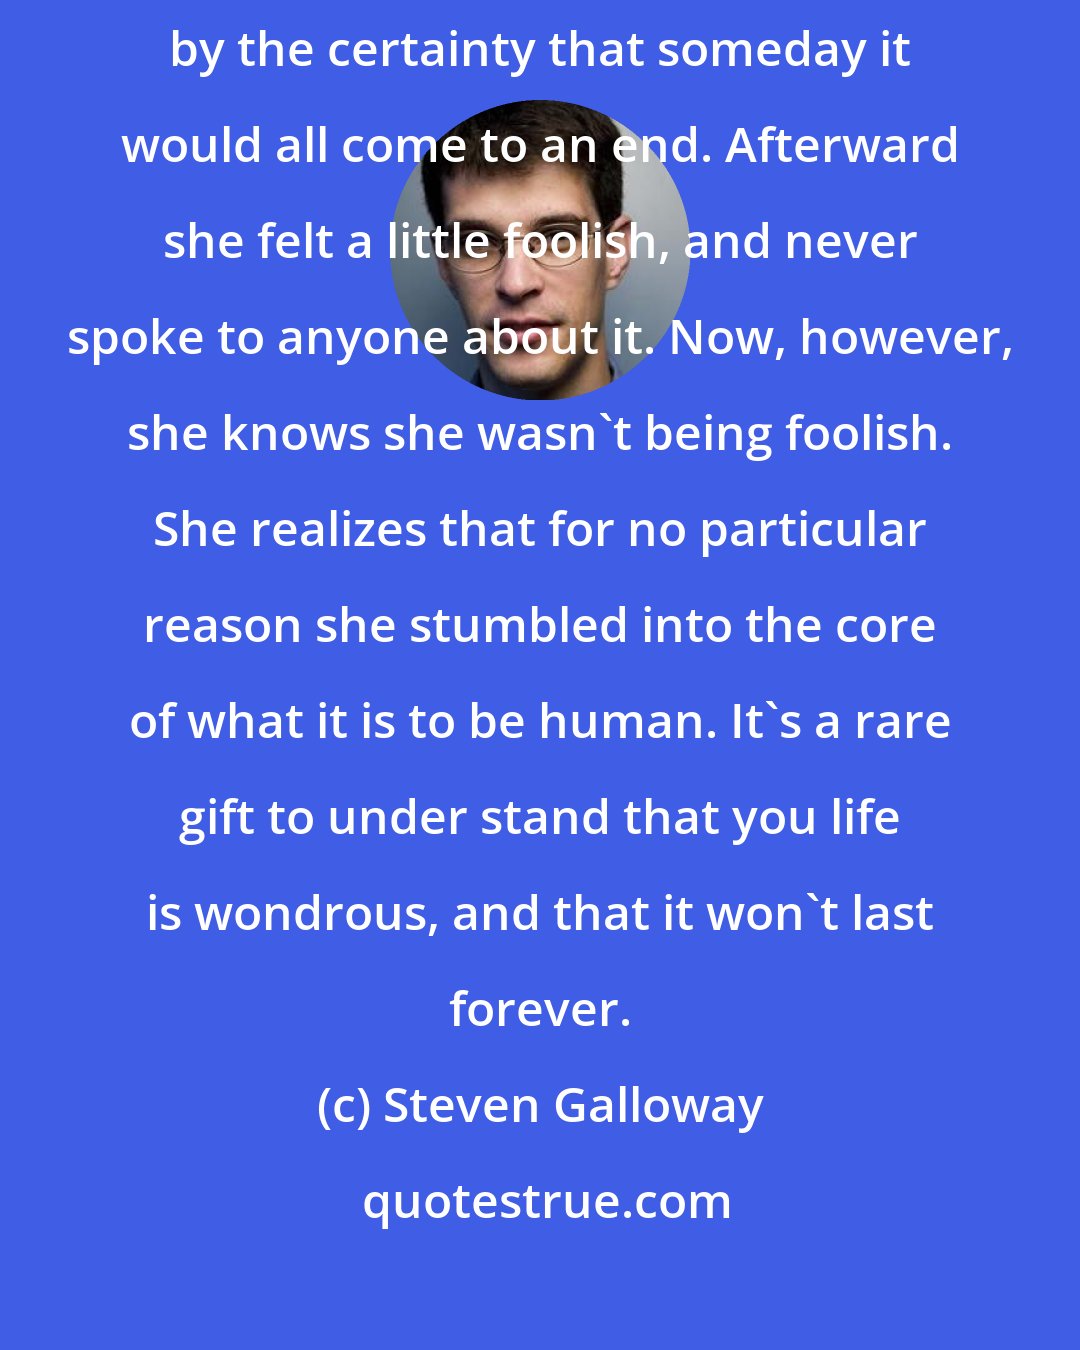 Steven Galloway: She felt an enveloping happiness to be alive, a joy made stronger by the certainty that someday it would all come to an end. Afterward she felt a little foolish, and never spoke to anyone about it. Now, however, she knows she wasn't being foolish. She realizes that for no particular reason she stumbled into the core of what it is to be human. It's a rare gift to under stand that you life is wondrous, and that it won't last forever.